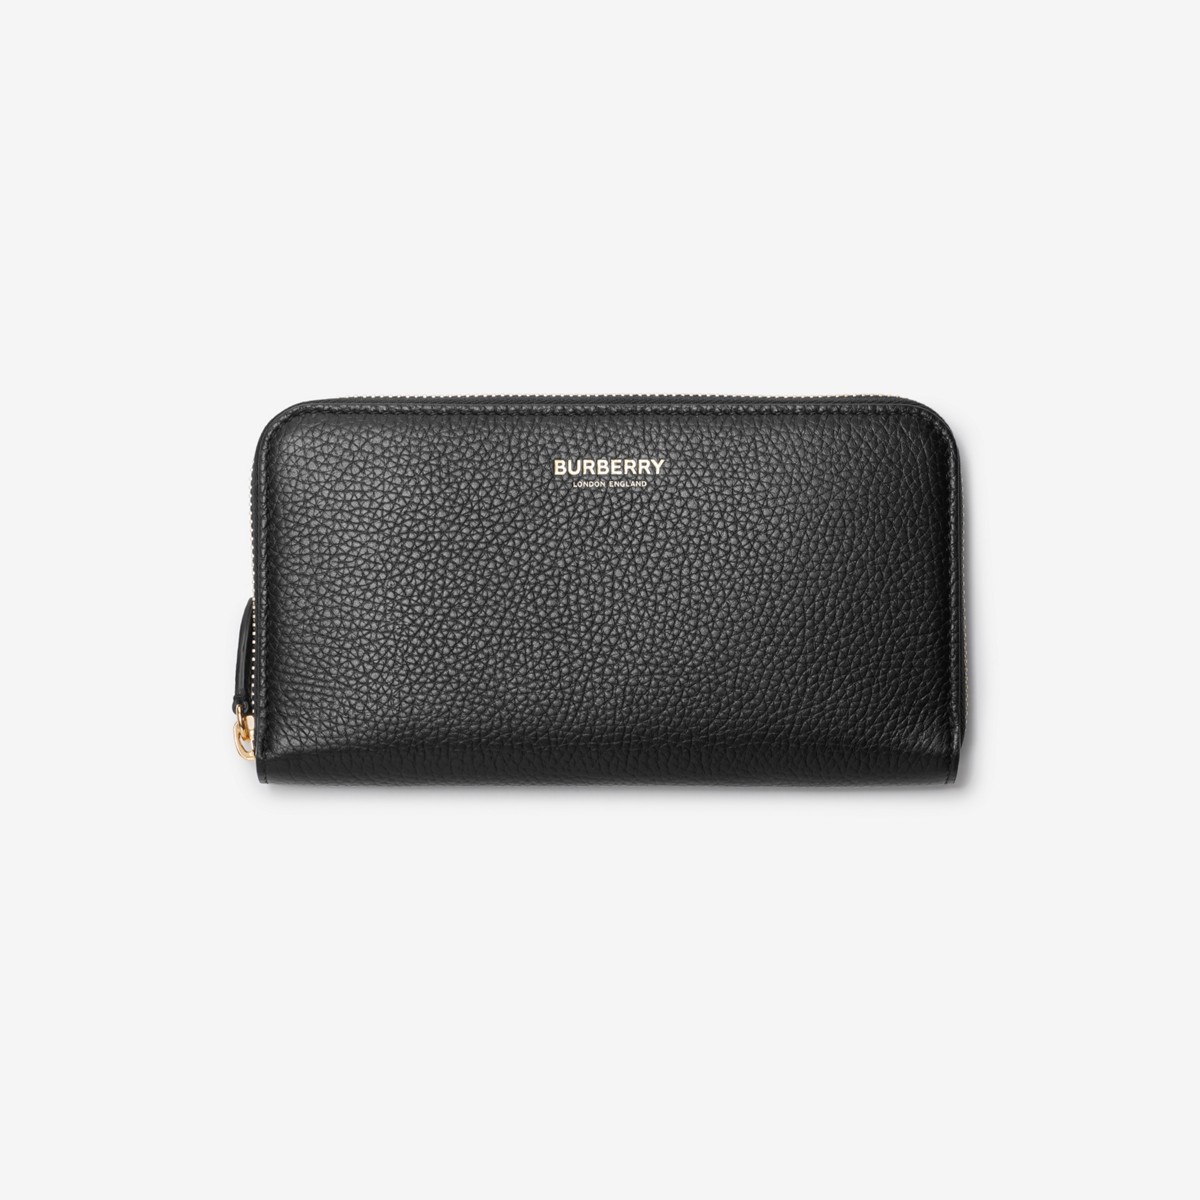 Burberry Large Leather Zip Wallet In Black